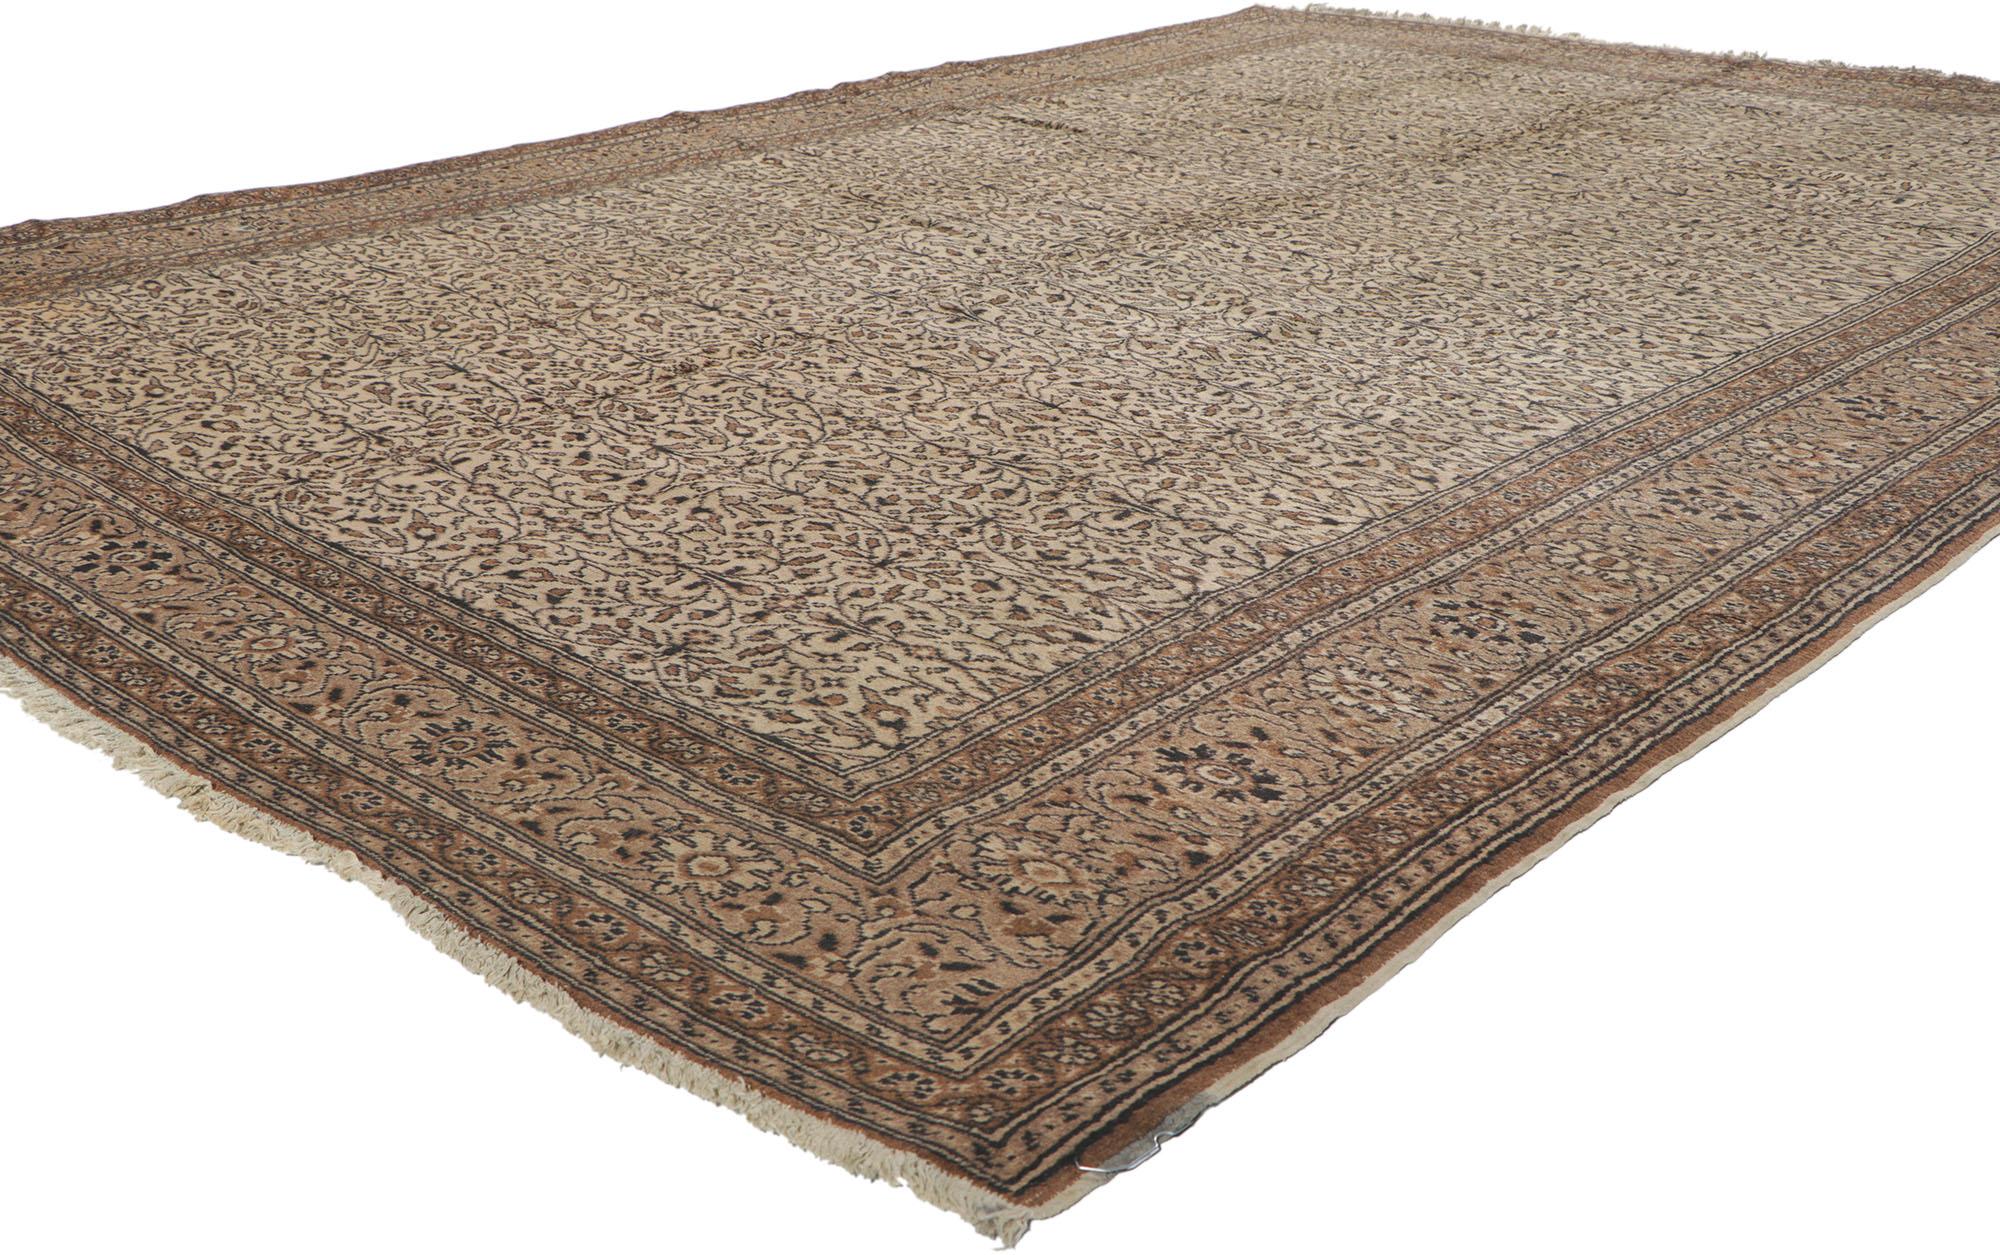 72682 Vintage Turkish Sivas Rug with Neoclassical Style. Showcasing timeless elegance in a demure color palette this hand knotted wool vintage Turkish Sivas rug features a repeating pattern creating an all-over floral lattice. It is enclosed with a